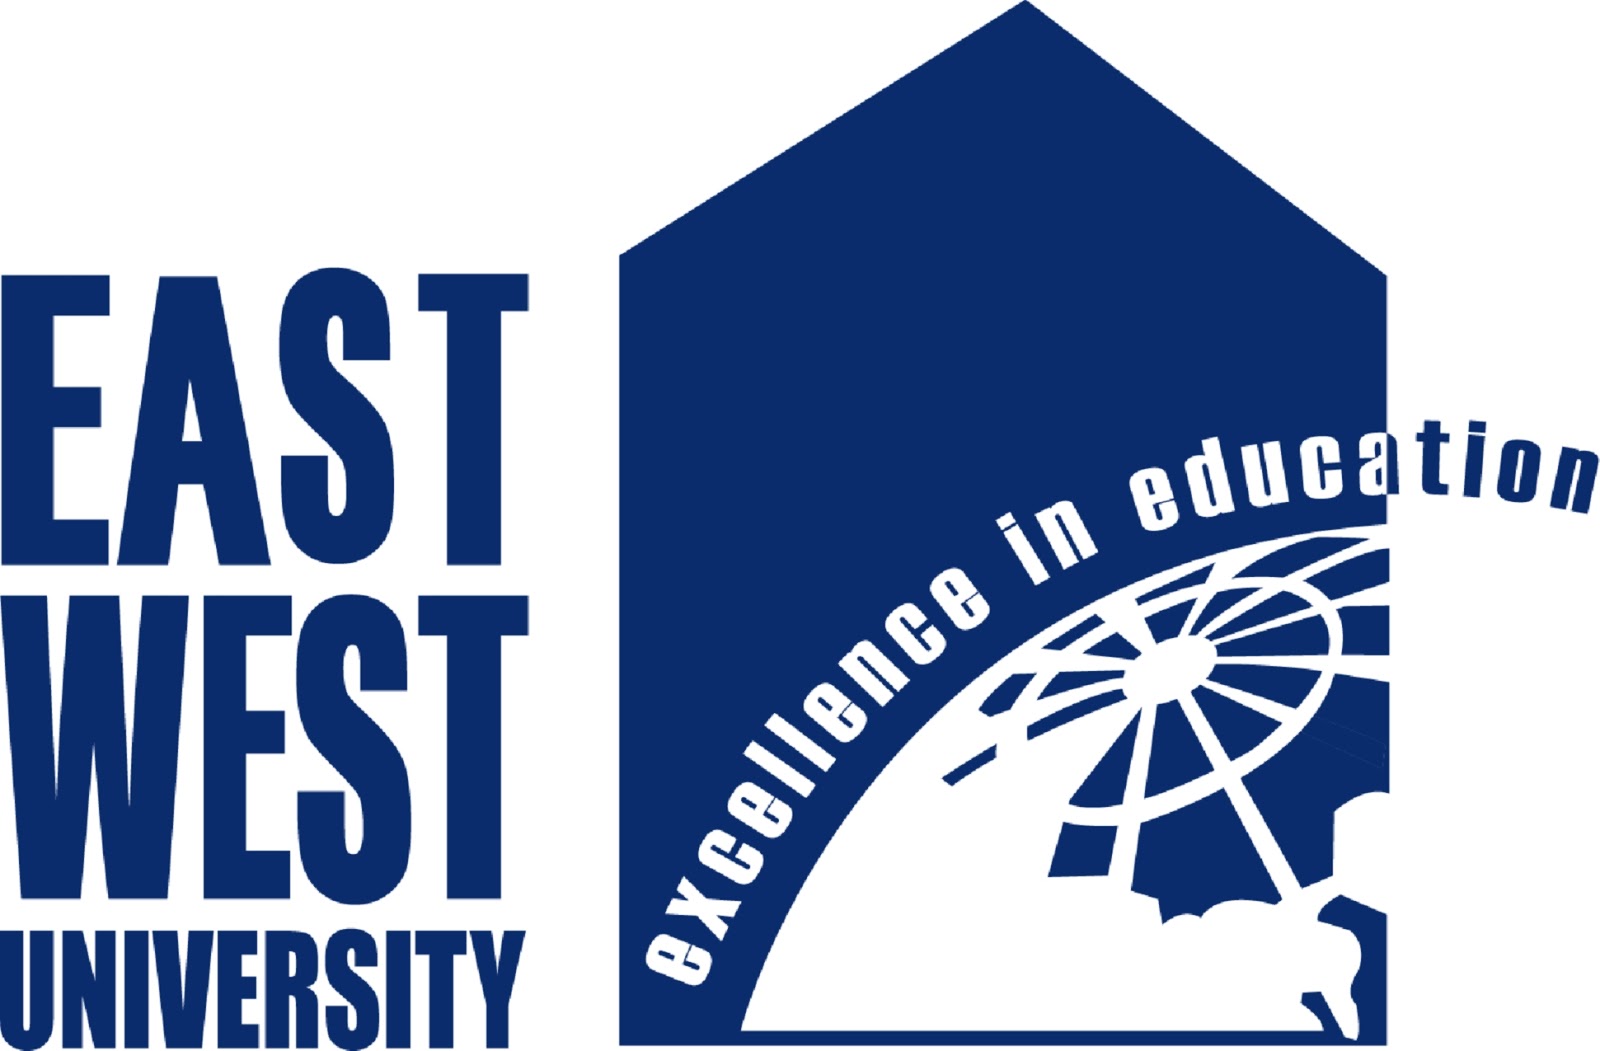 East West University A Blend Of The East And The West